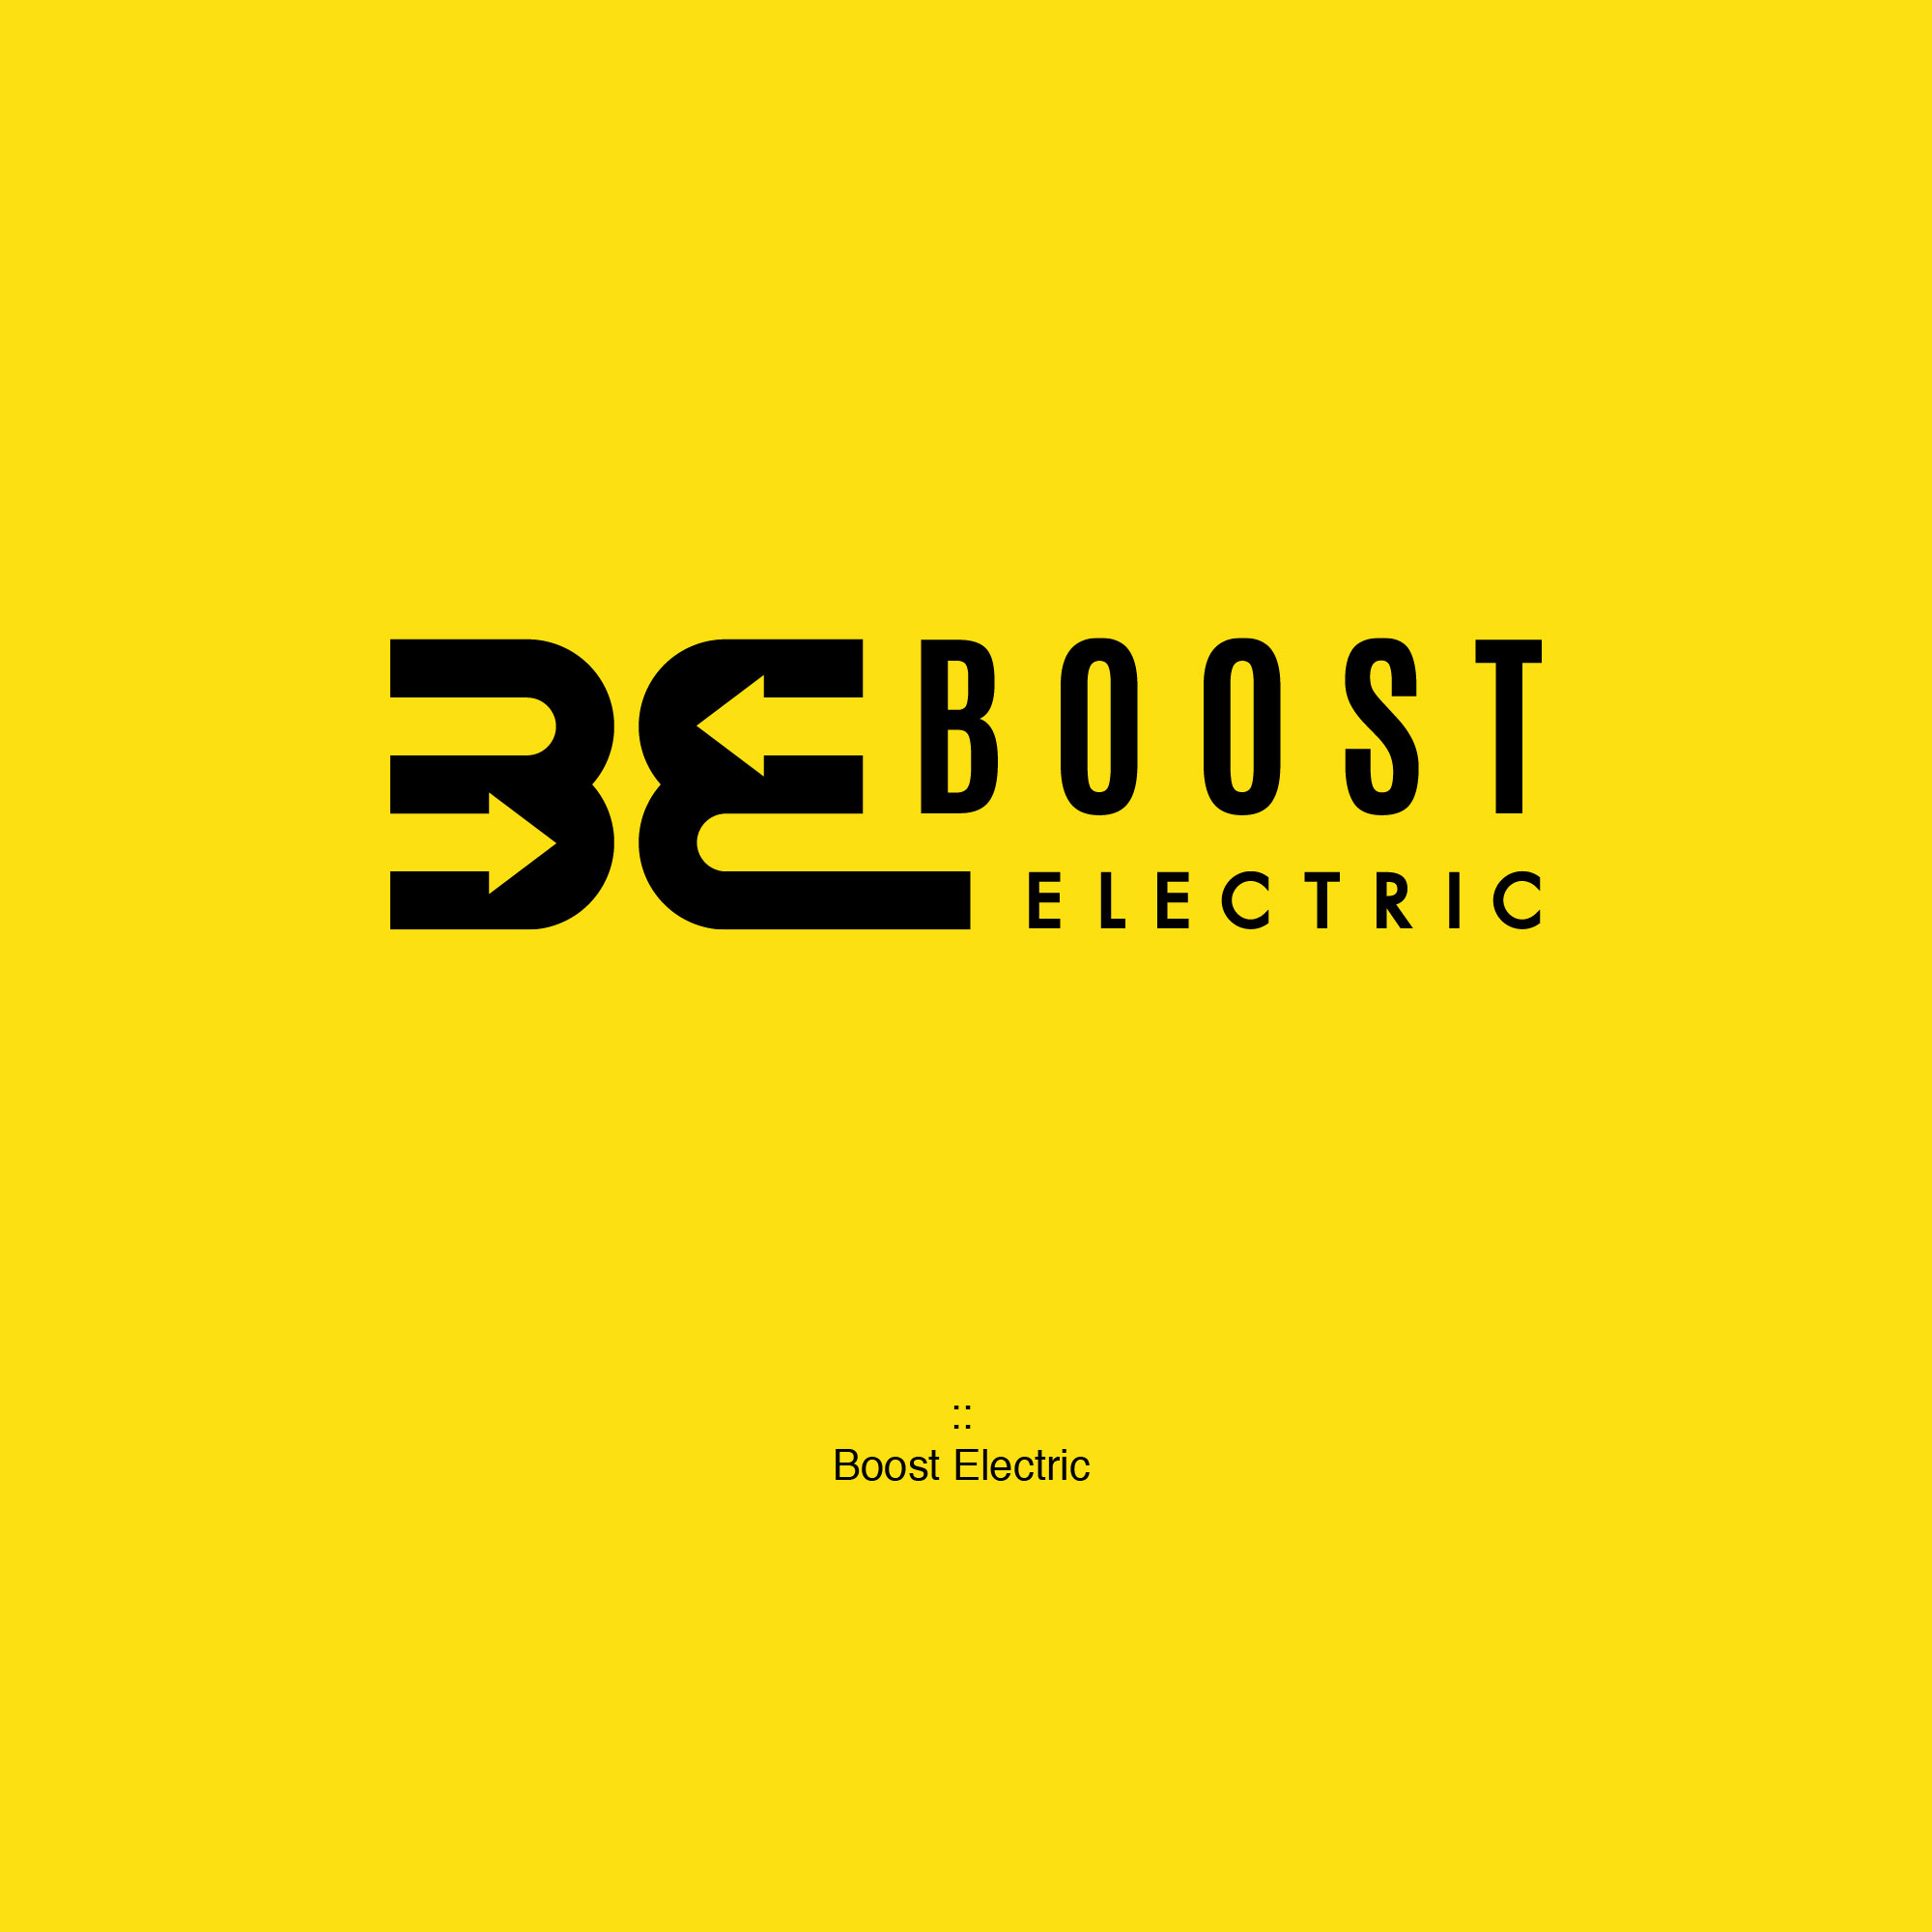 Boost Electric